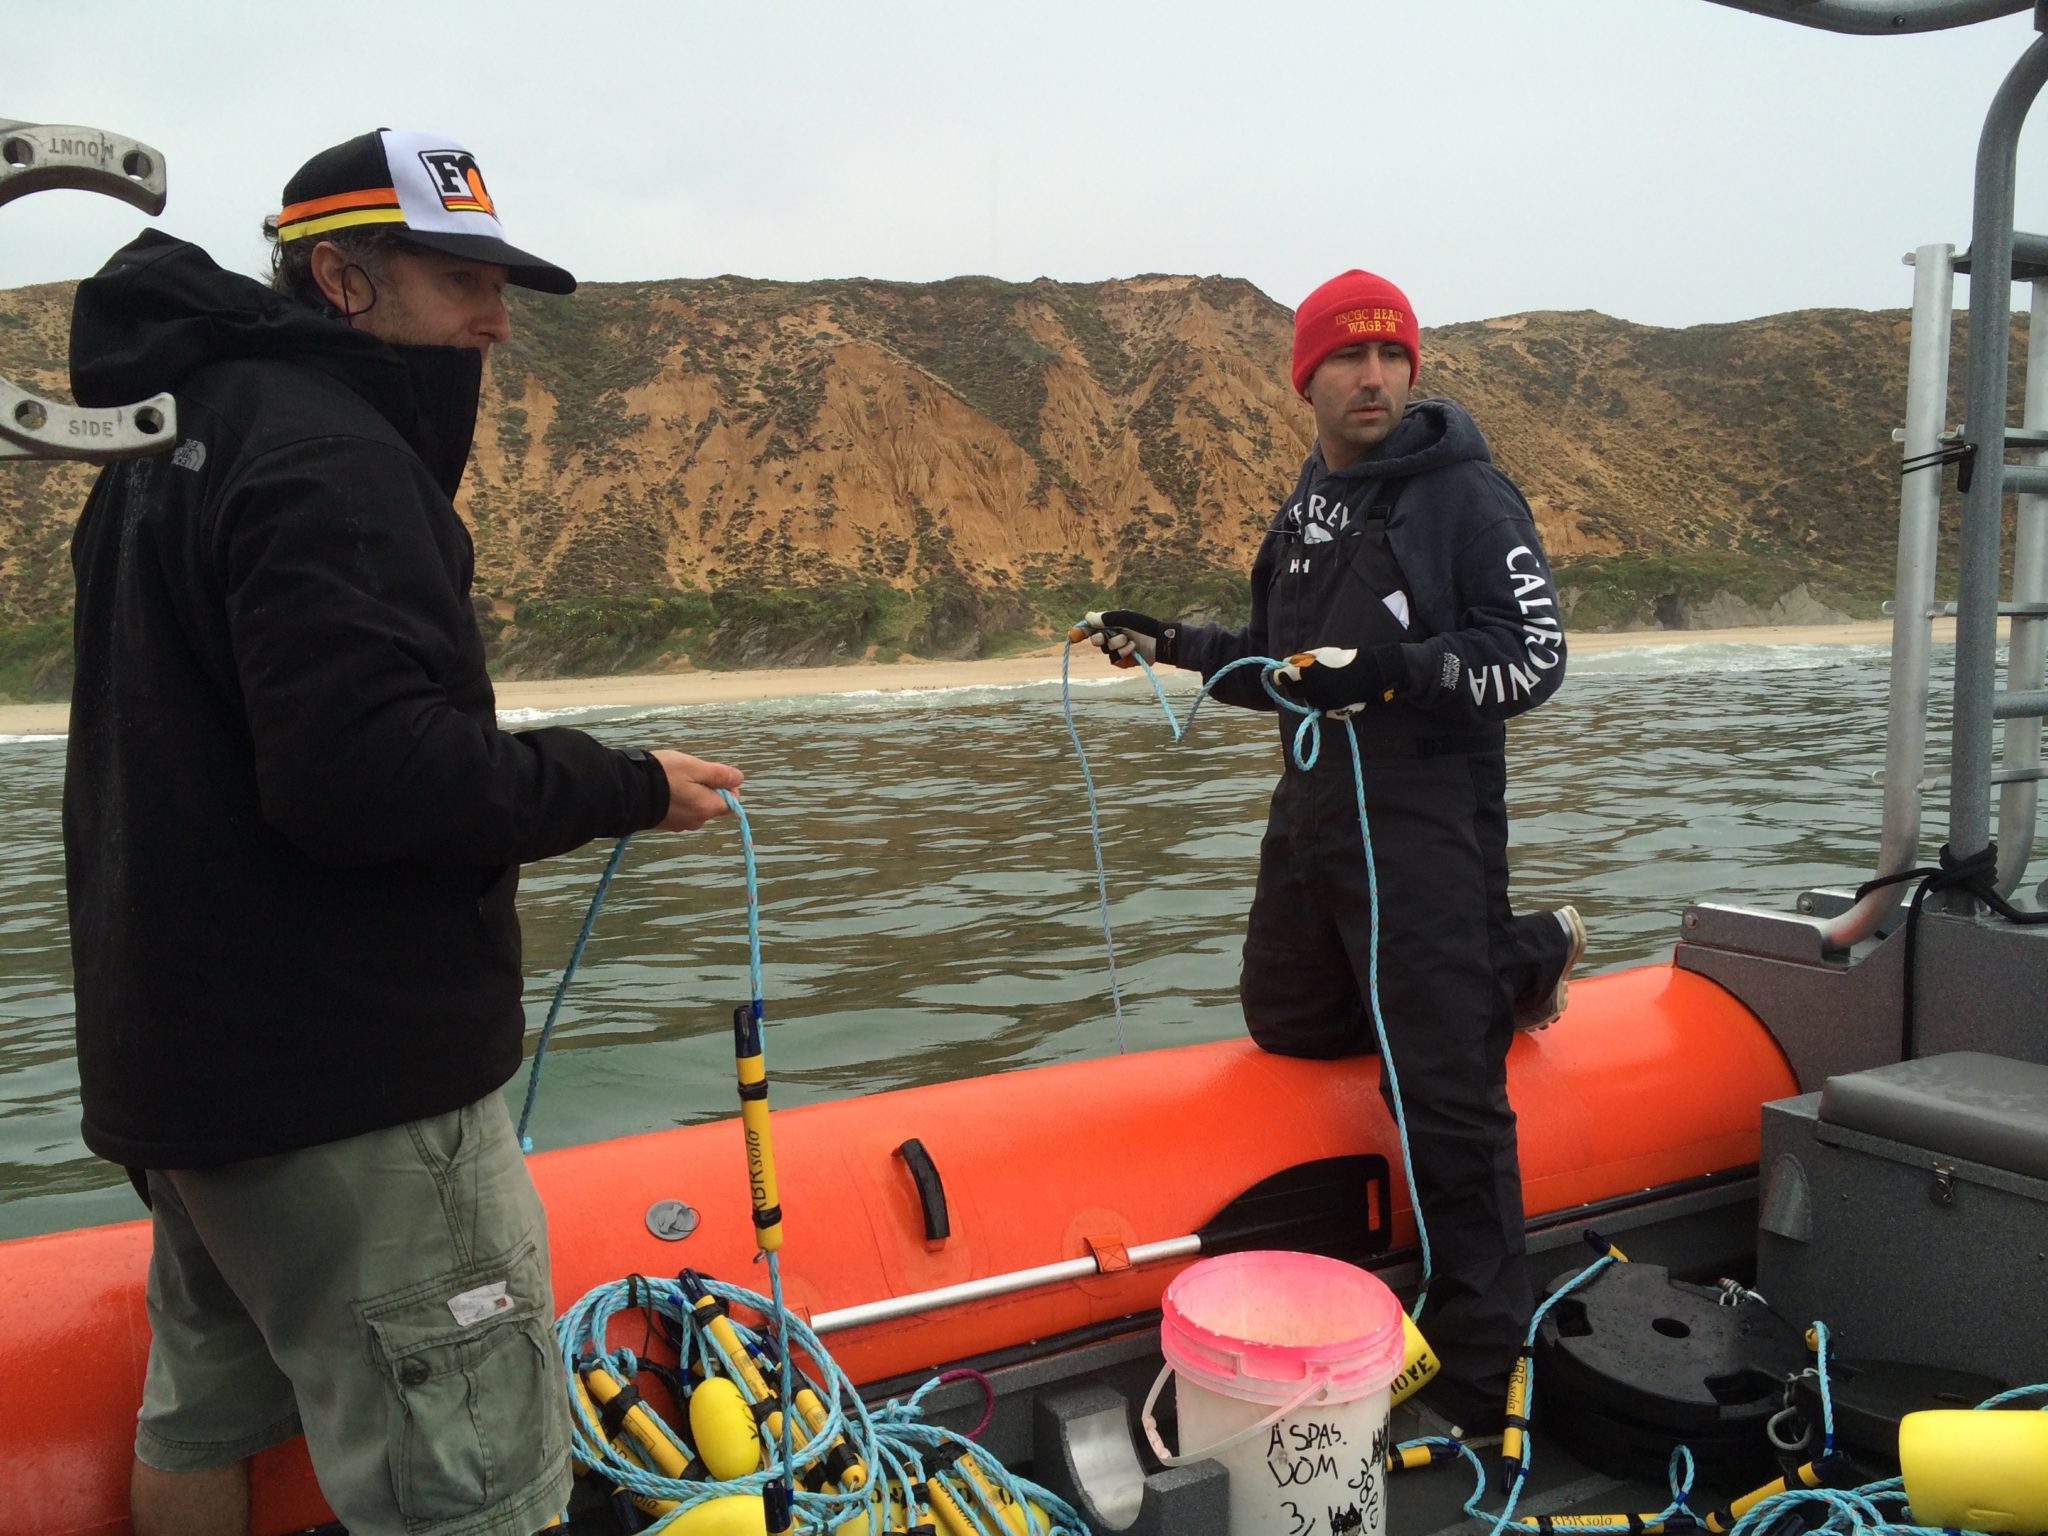 OCEANOGRAPHER JAMIE MACMAHAN AND PH.D STUDENT TUCKER FREISMUTH DEPLOY A LINE OF TEMPERATURE SENSORS IN THE NEARSHORE OFF THE COAST OF POINT SAL STATE PARK